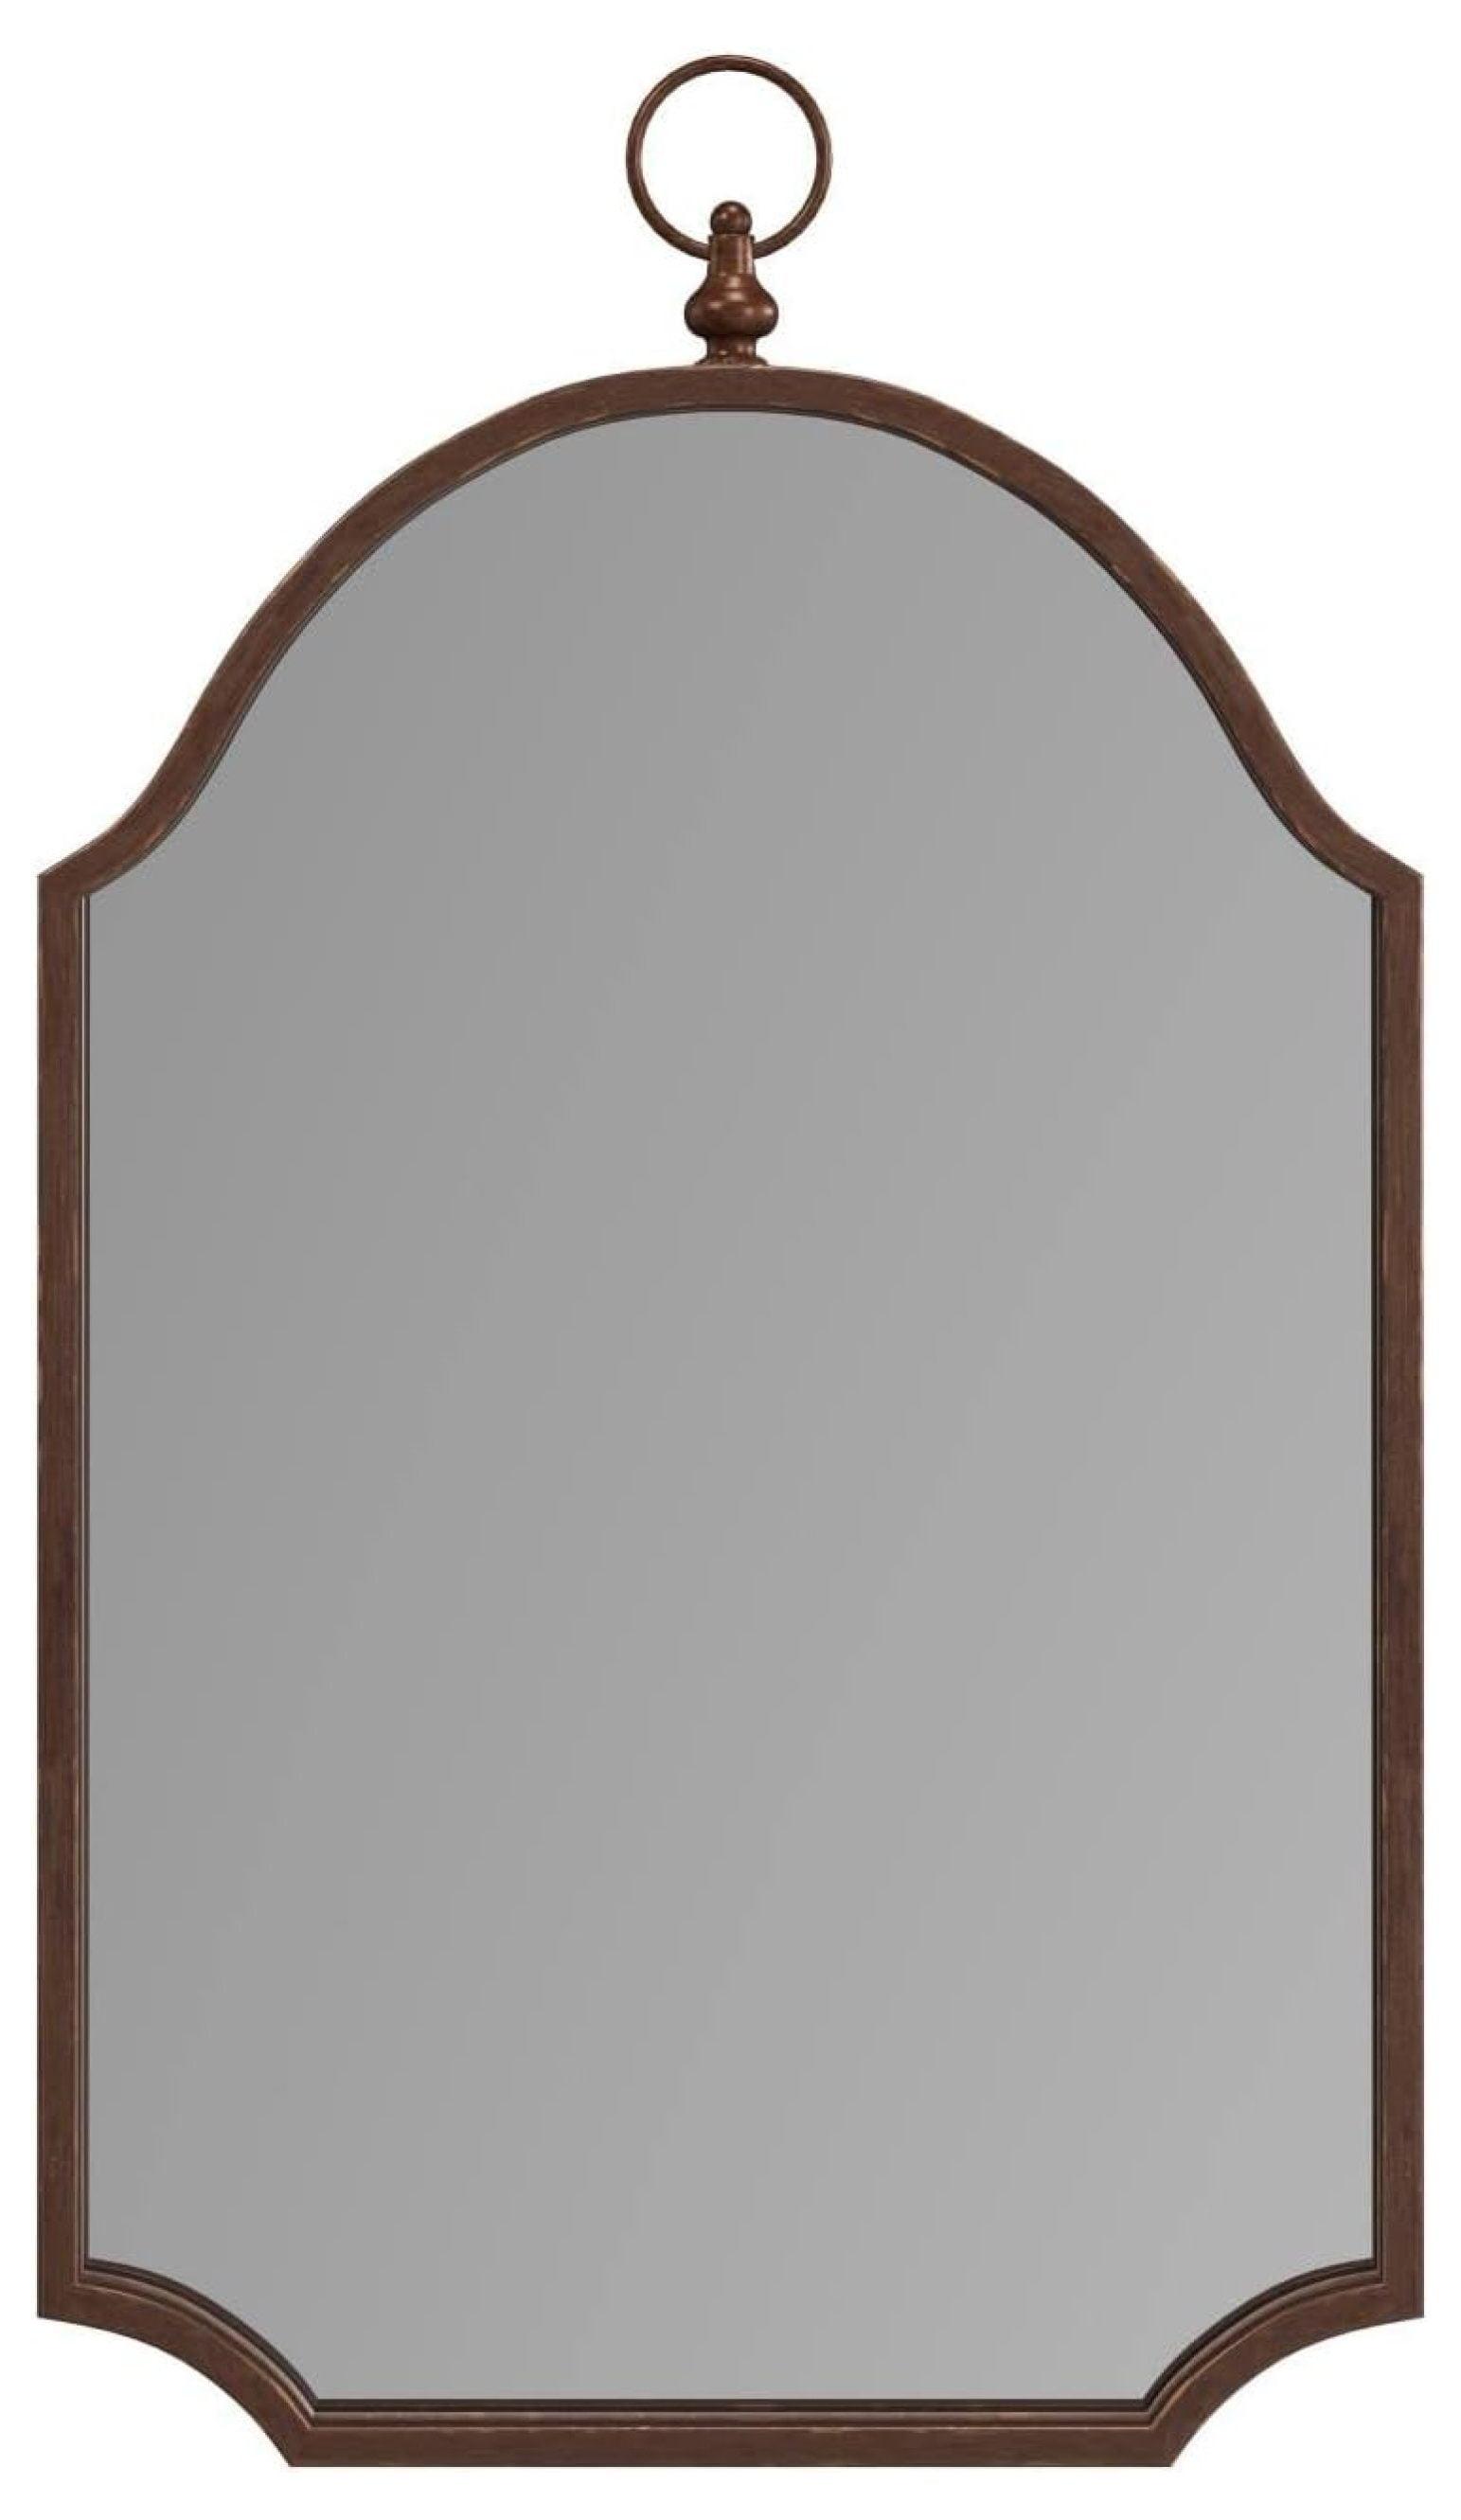 Transitional Malina Rectangular Wall Mirror with Antiqued Bronze Finish